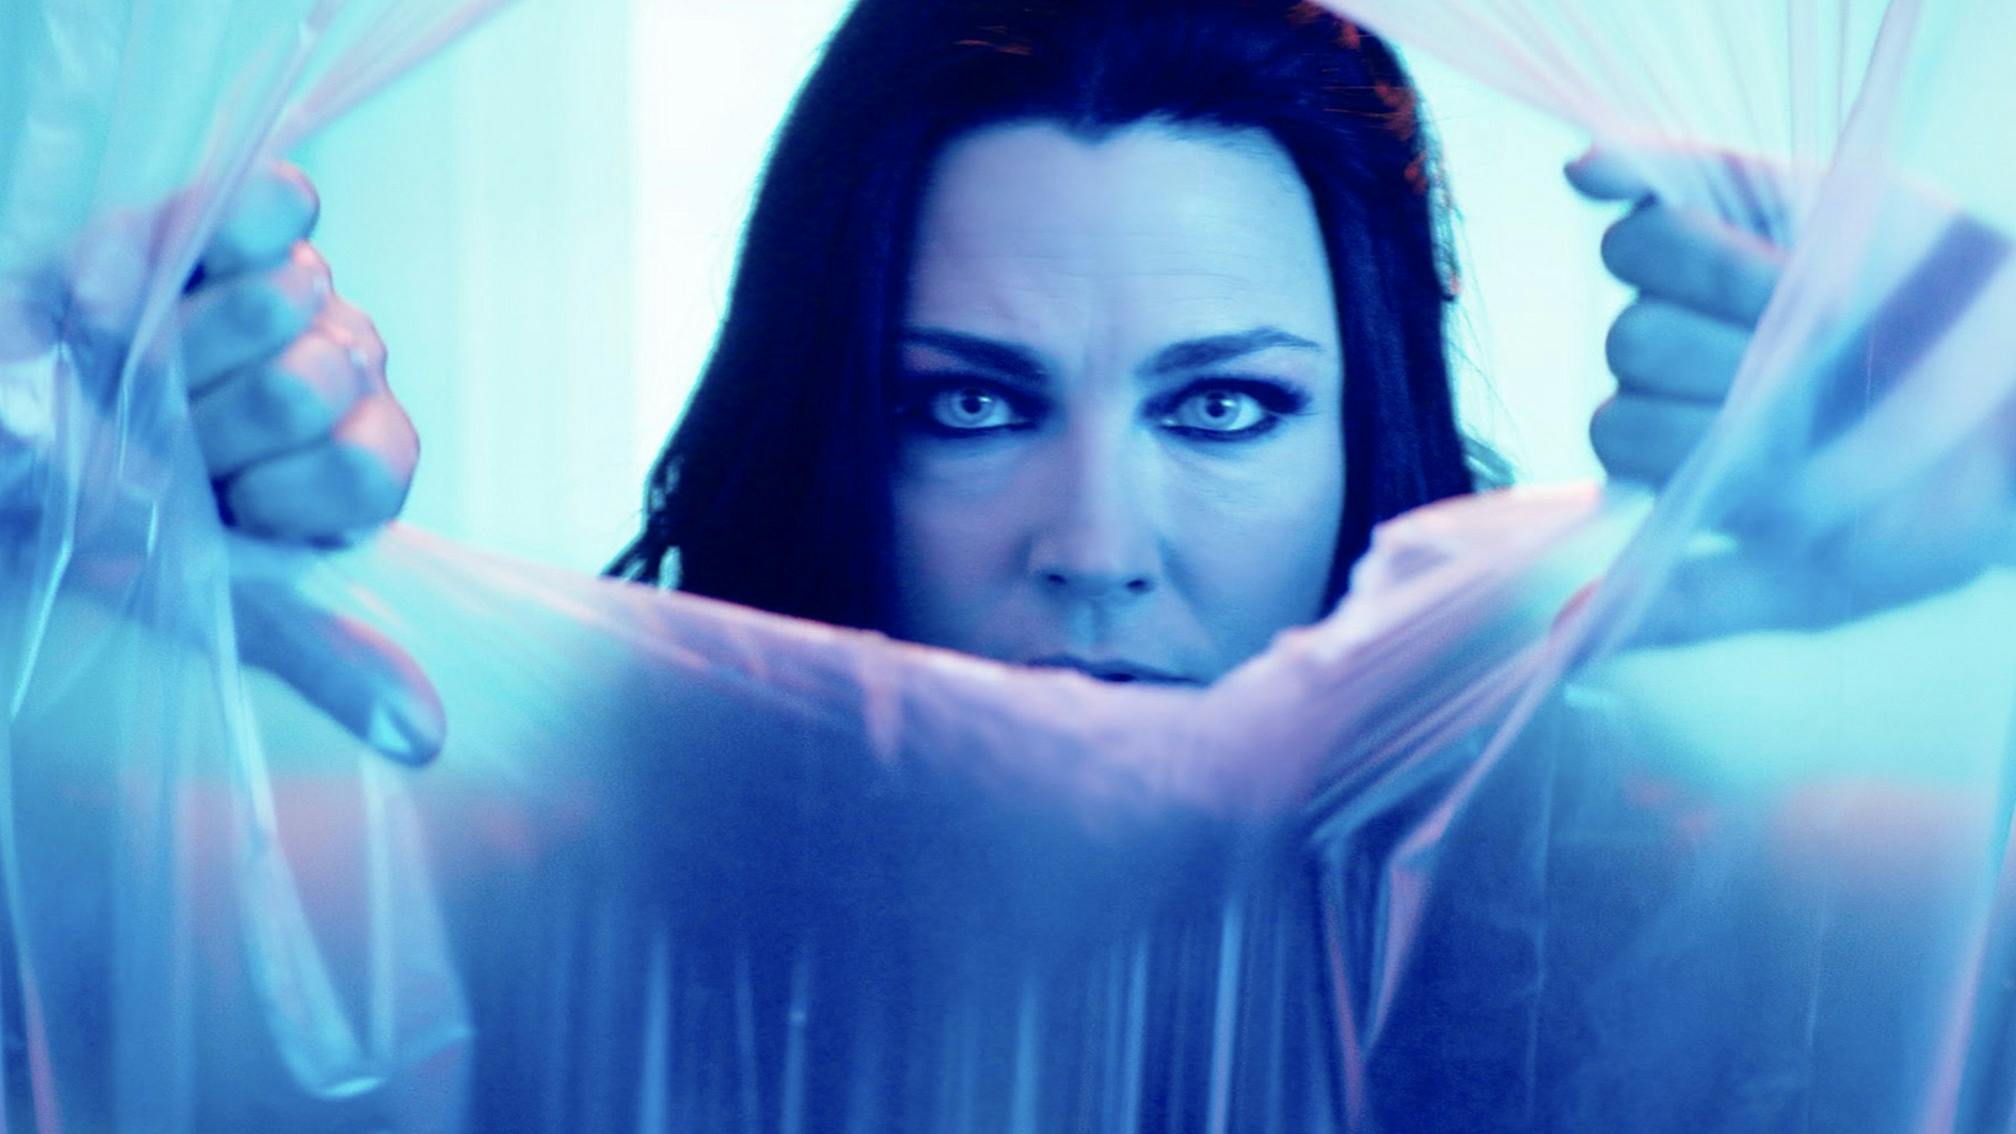 Evanescence unveil Better Without You video, announce free livestream event